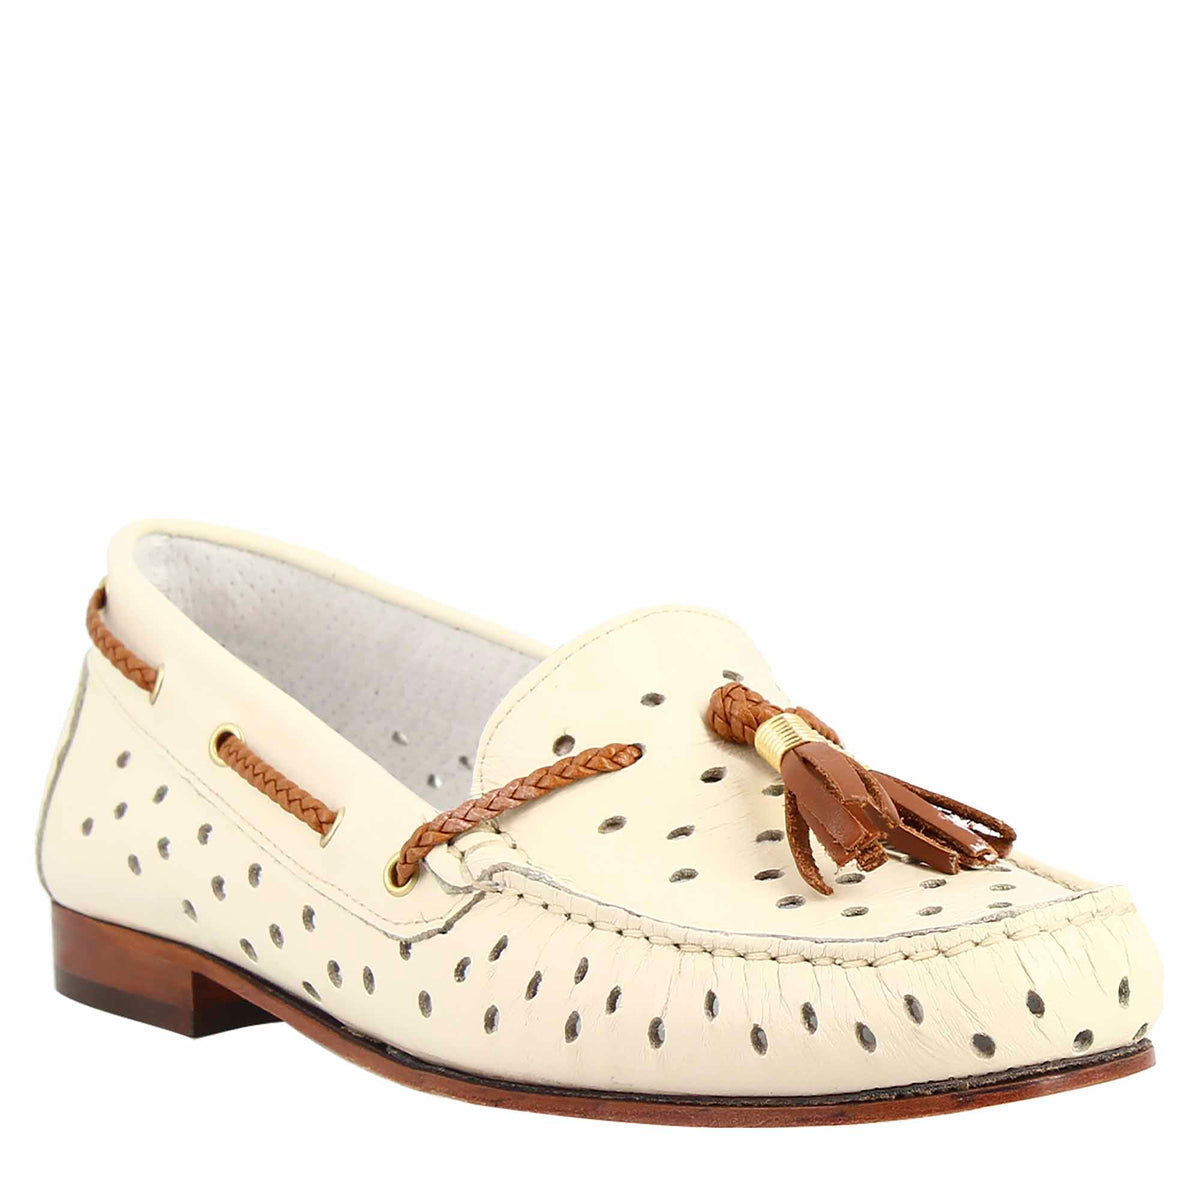 Classic women's loafers handmade in cream white perforated leather 